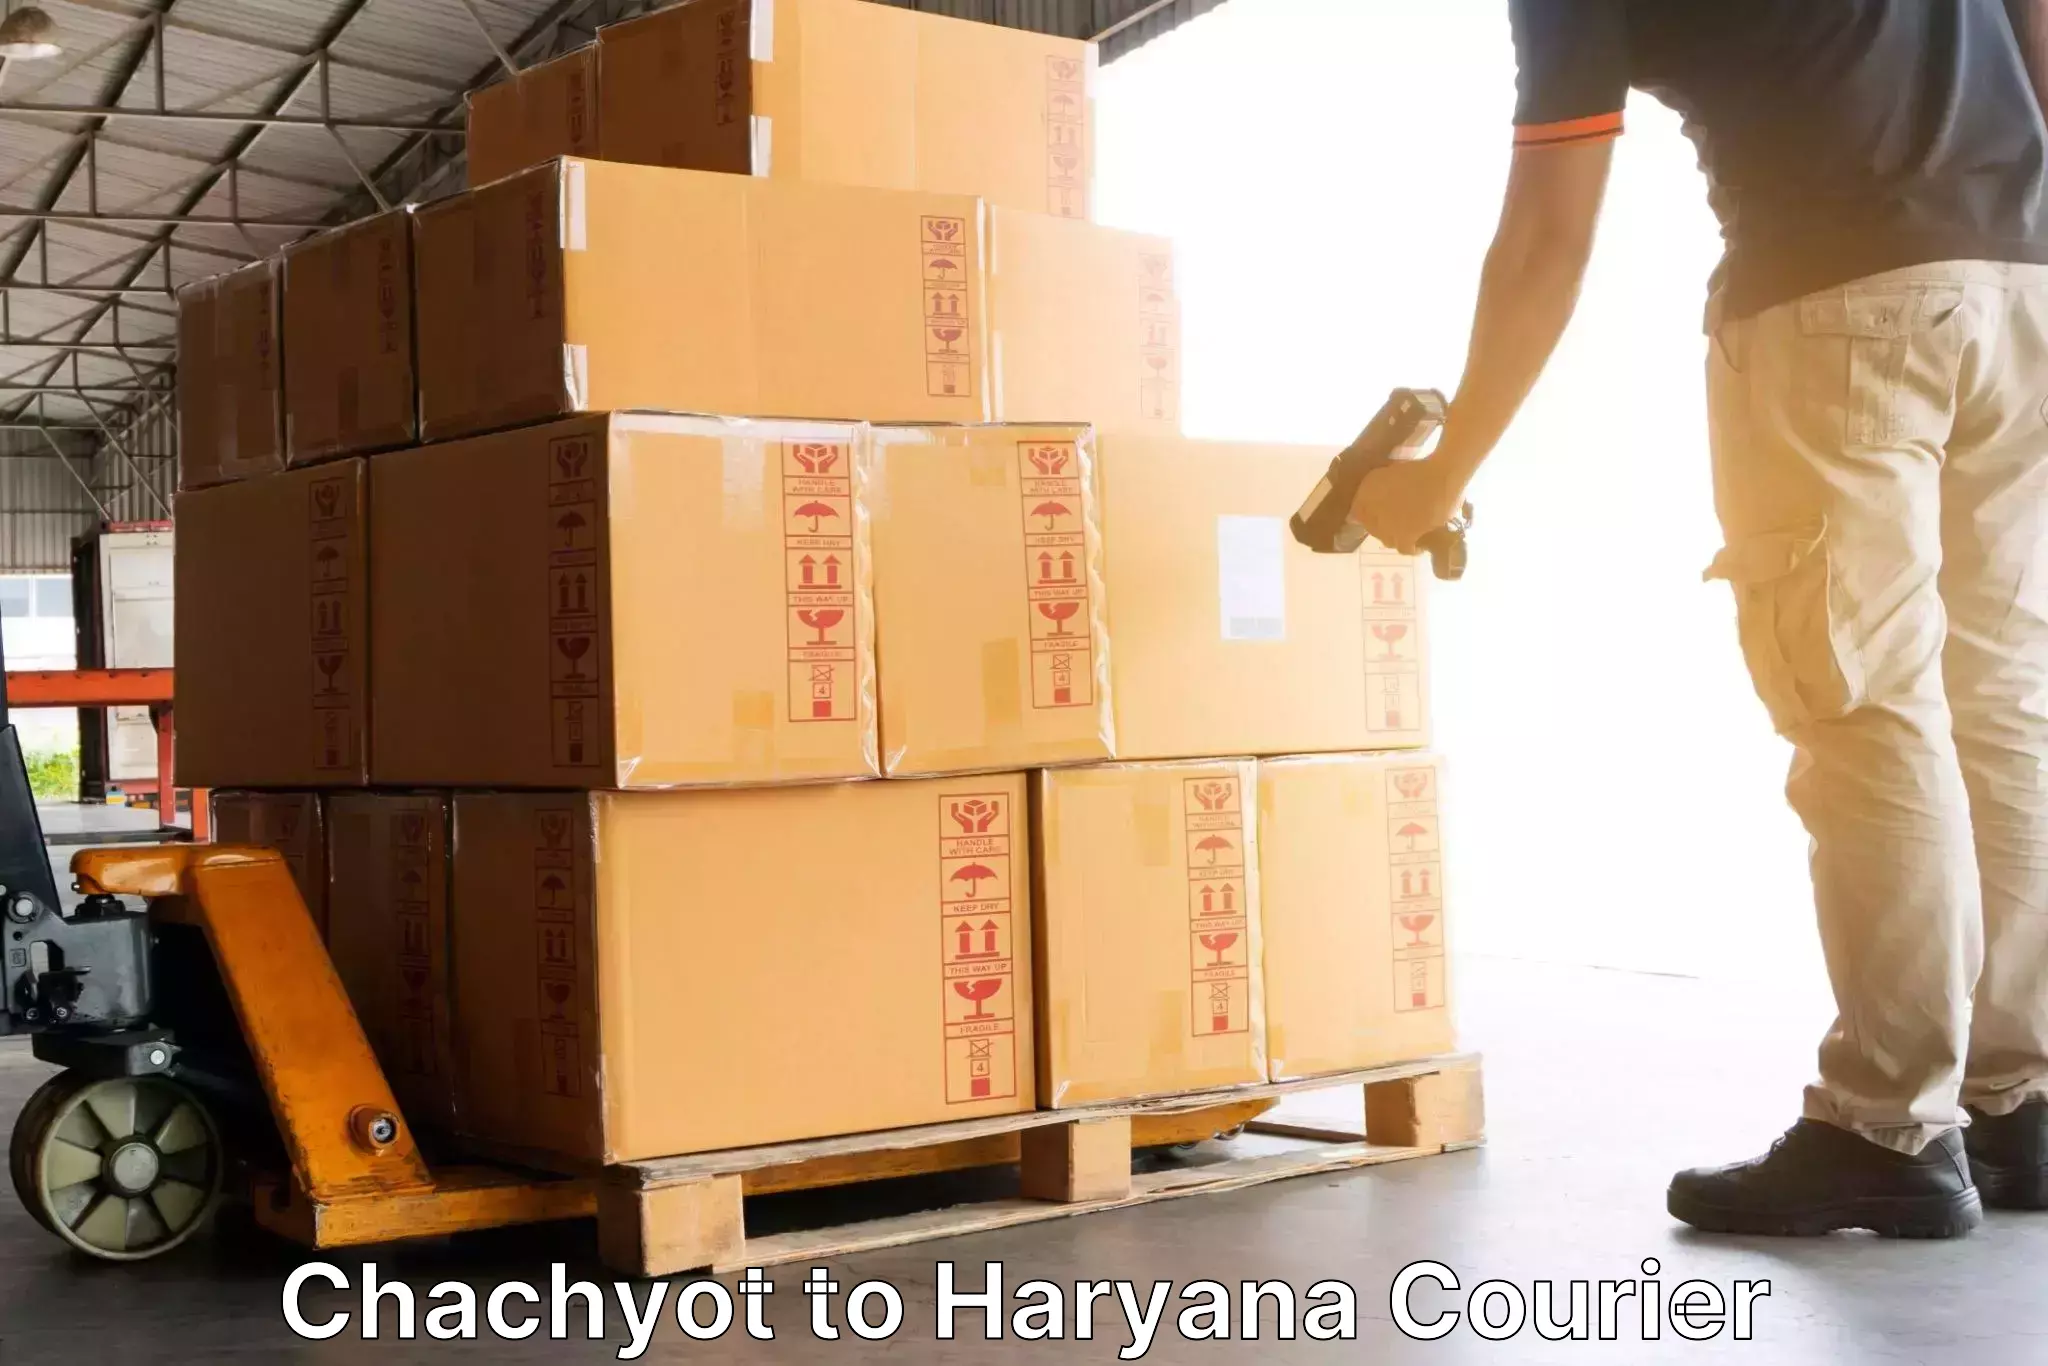 Courier tracking online Chachyot to Chaudhary Charan Singh Haryana Agricultural University Hisar